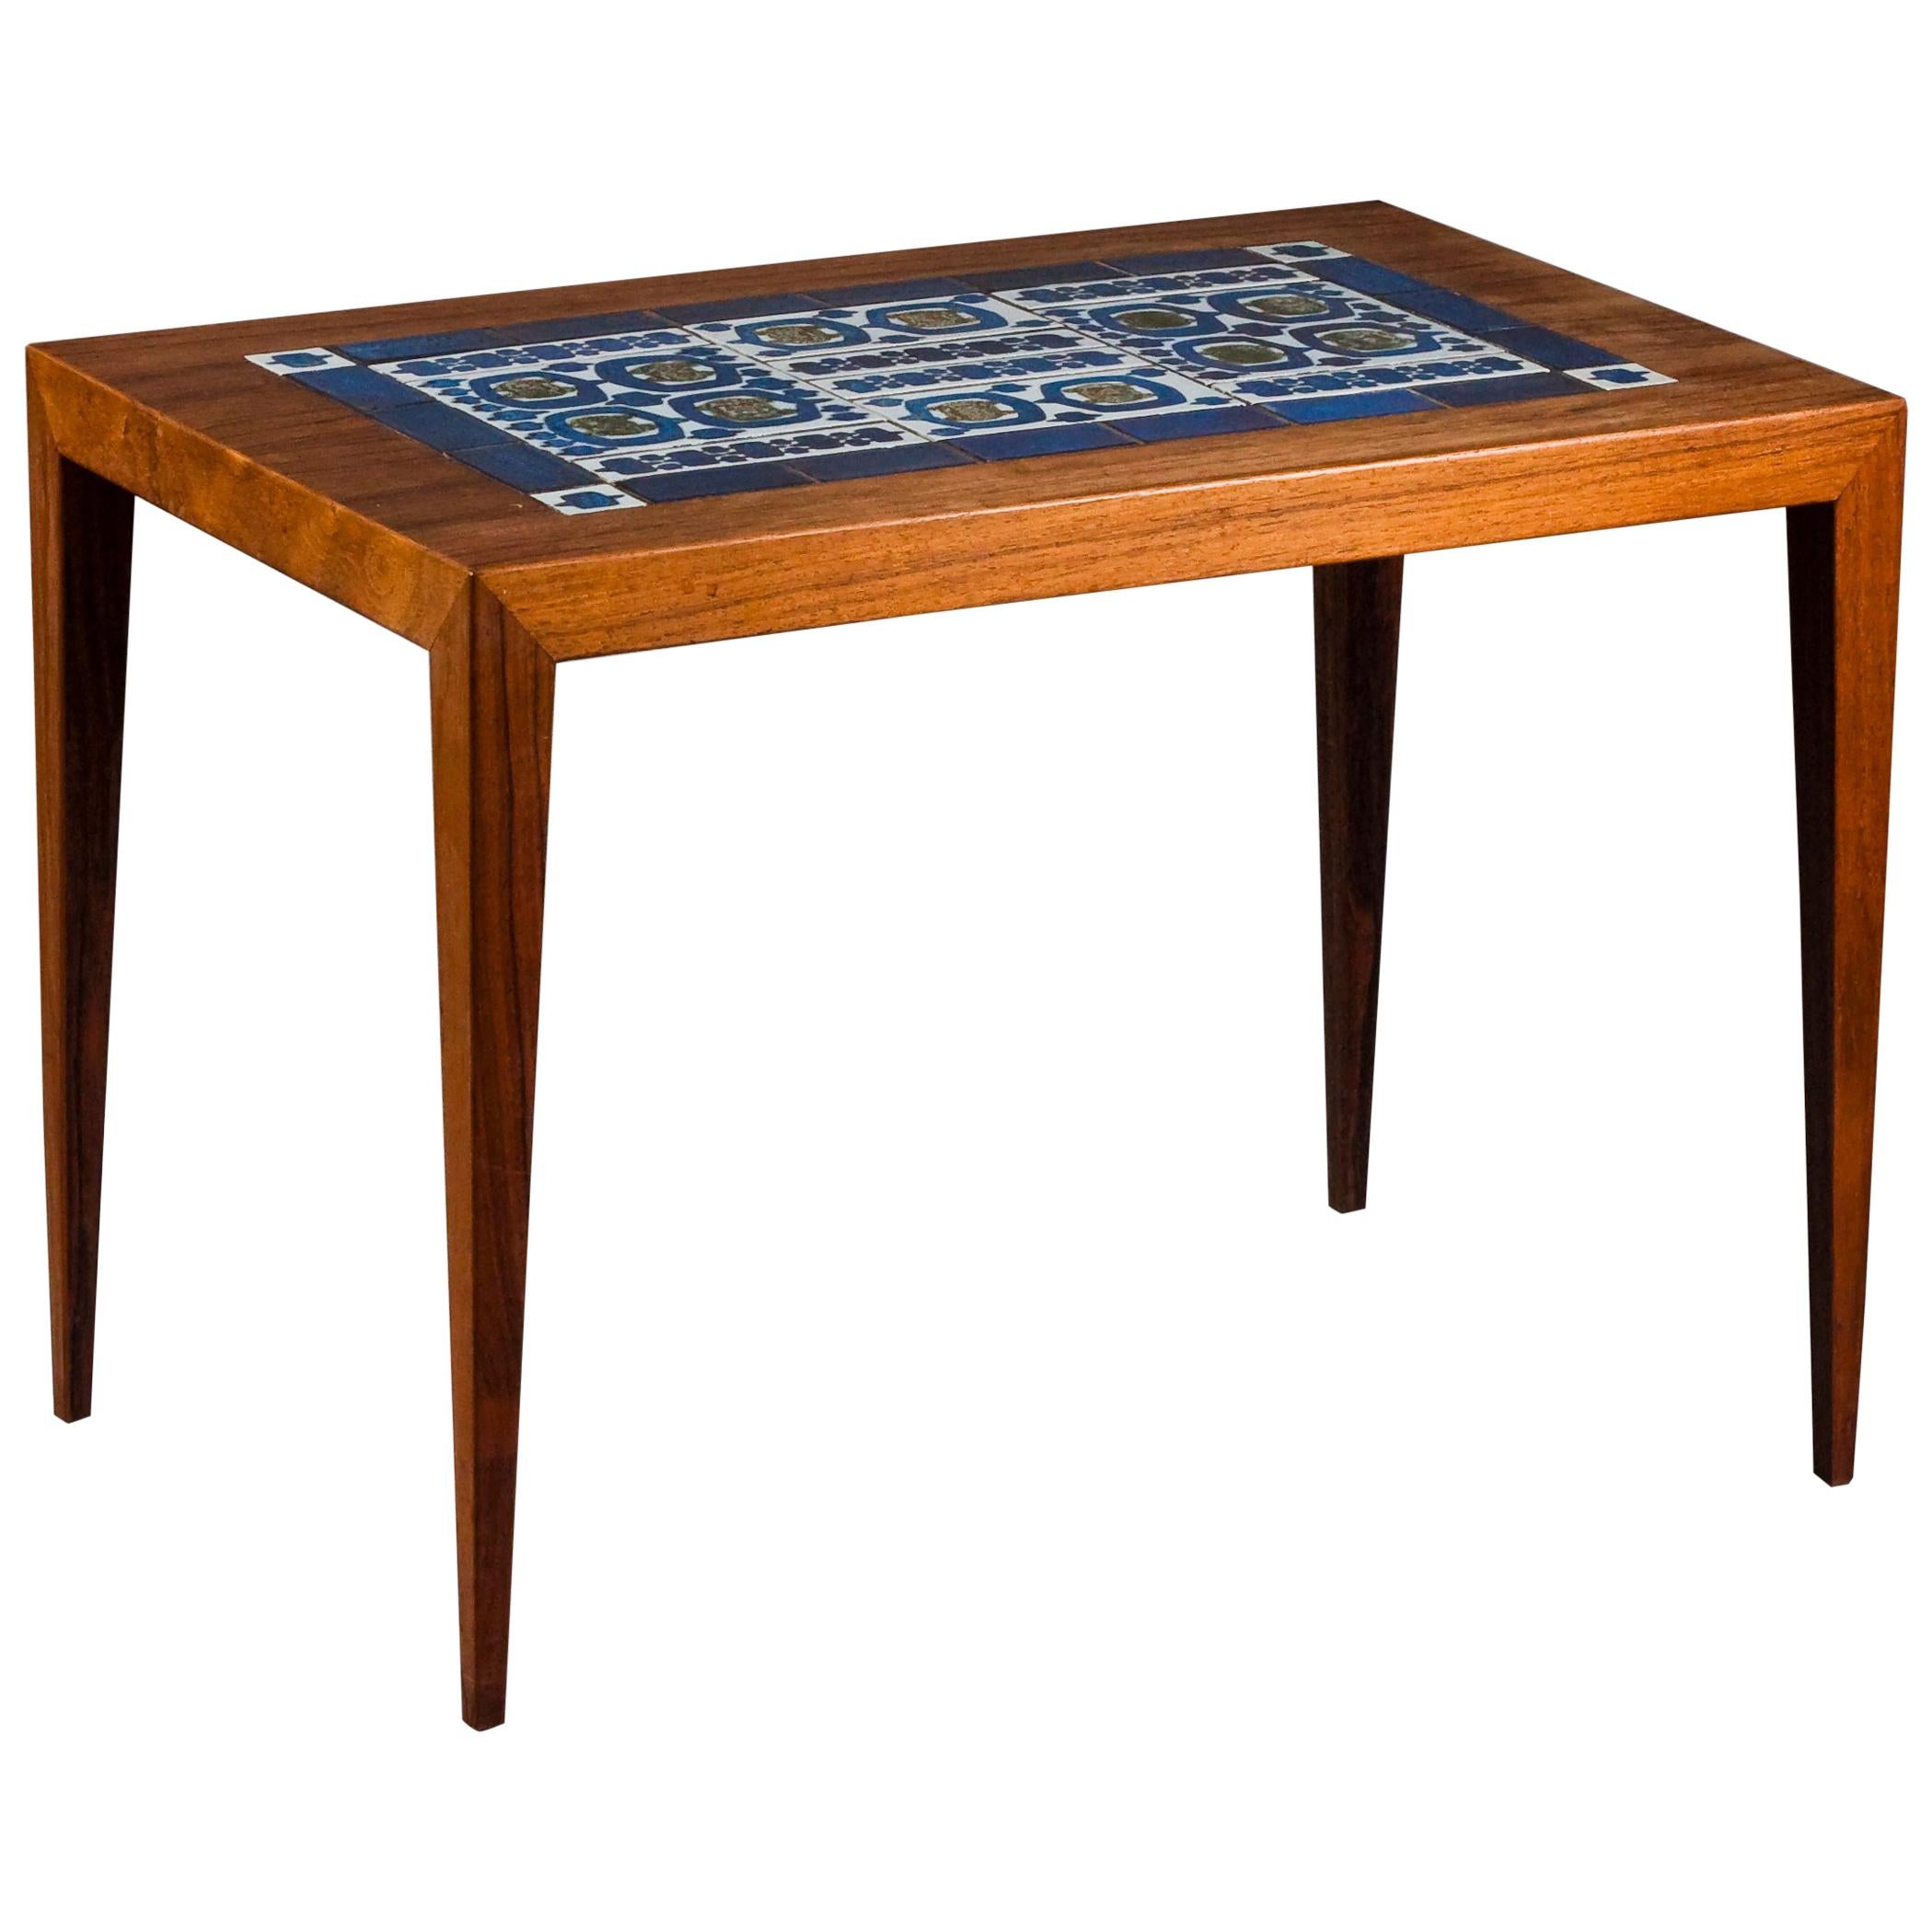 Danish Rosewood Coffee Table with Ceramic Tile Top, Tenera, by Severin Hansen For Sale